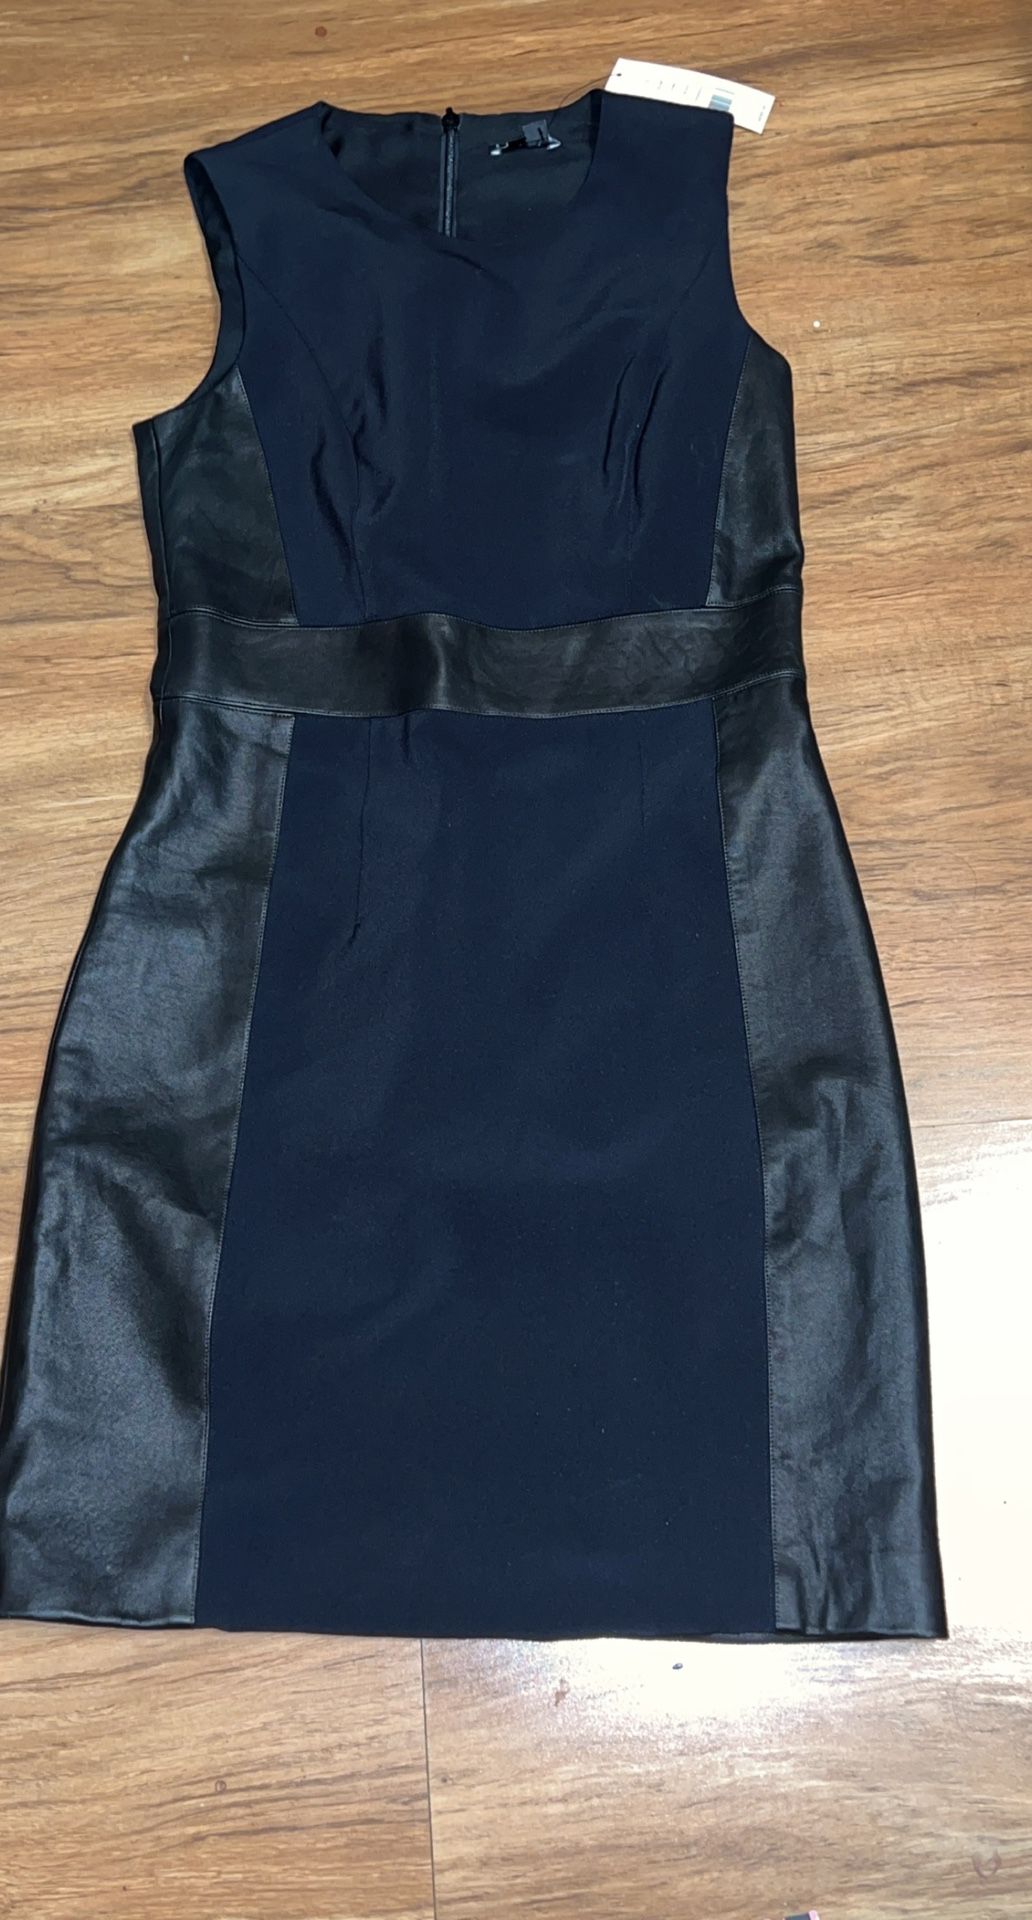 Theory Taline C Lambskin Leather Panel Dress Size 2 but it probably fit a Sz 4 as well,asking $220